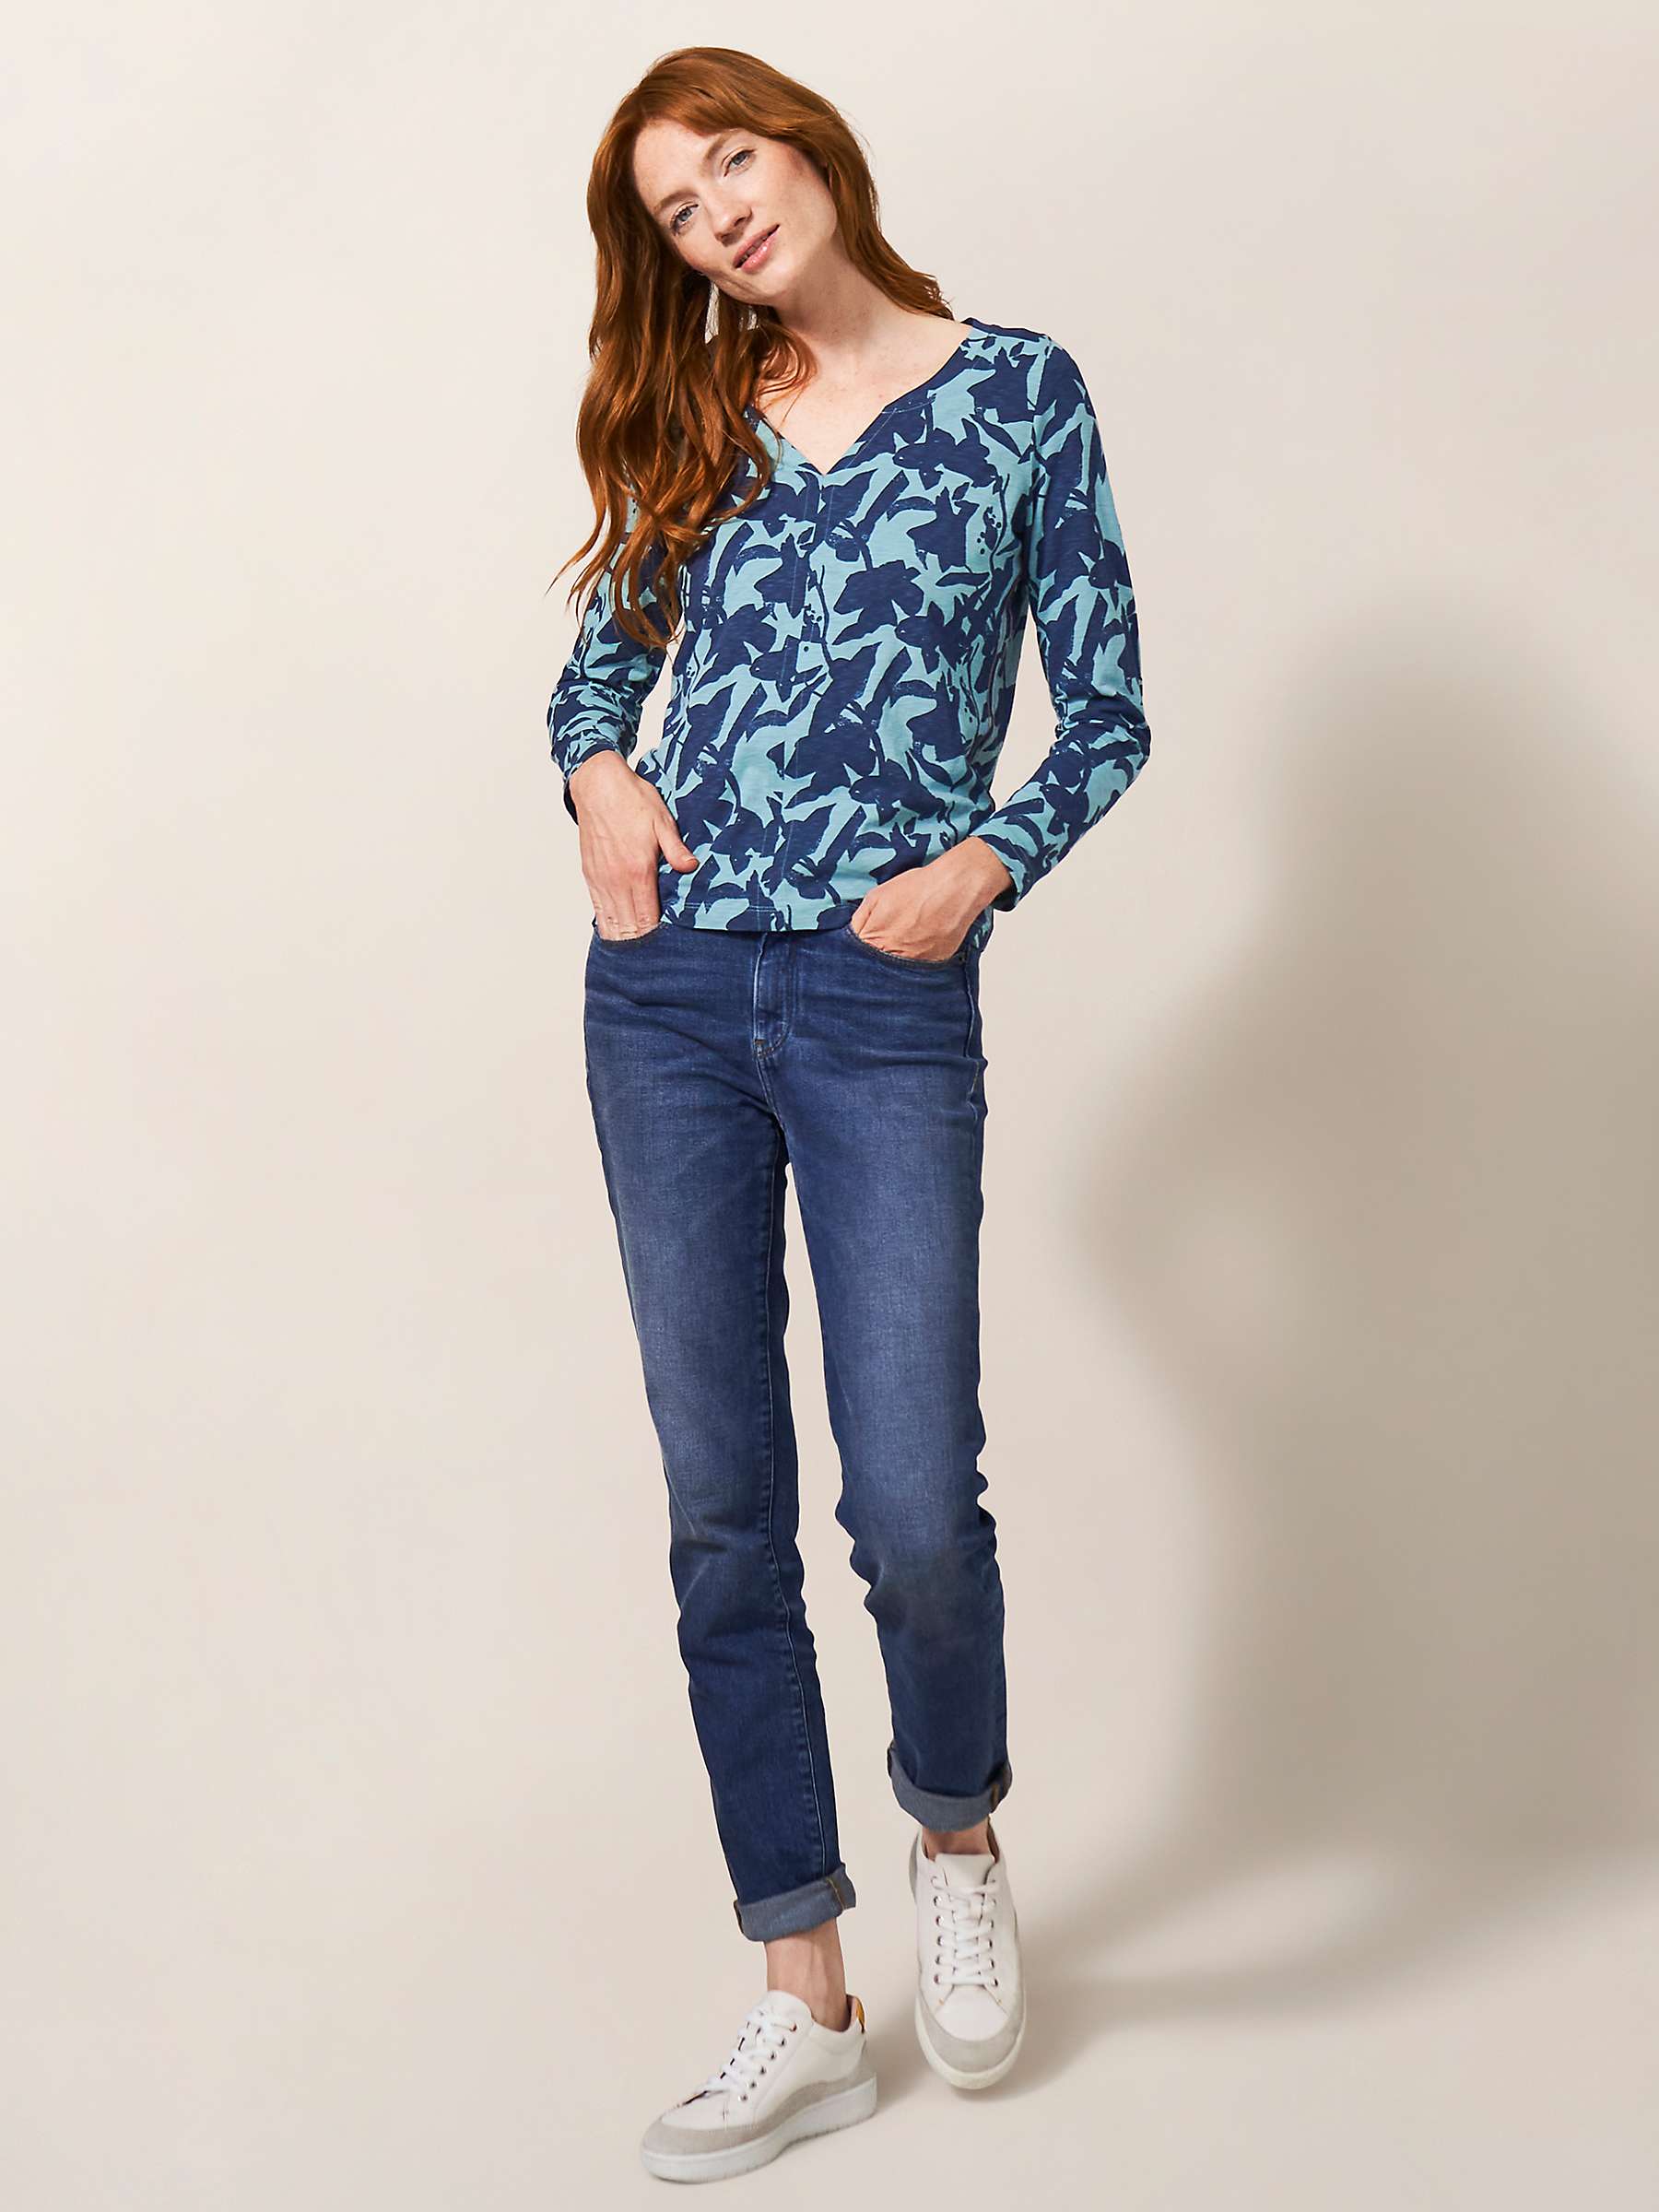 Buy White Stuff Nelly Cotton Top, Teal Online at johnlewis.com